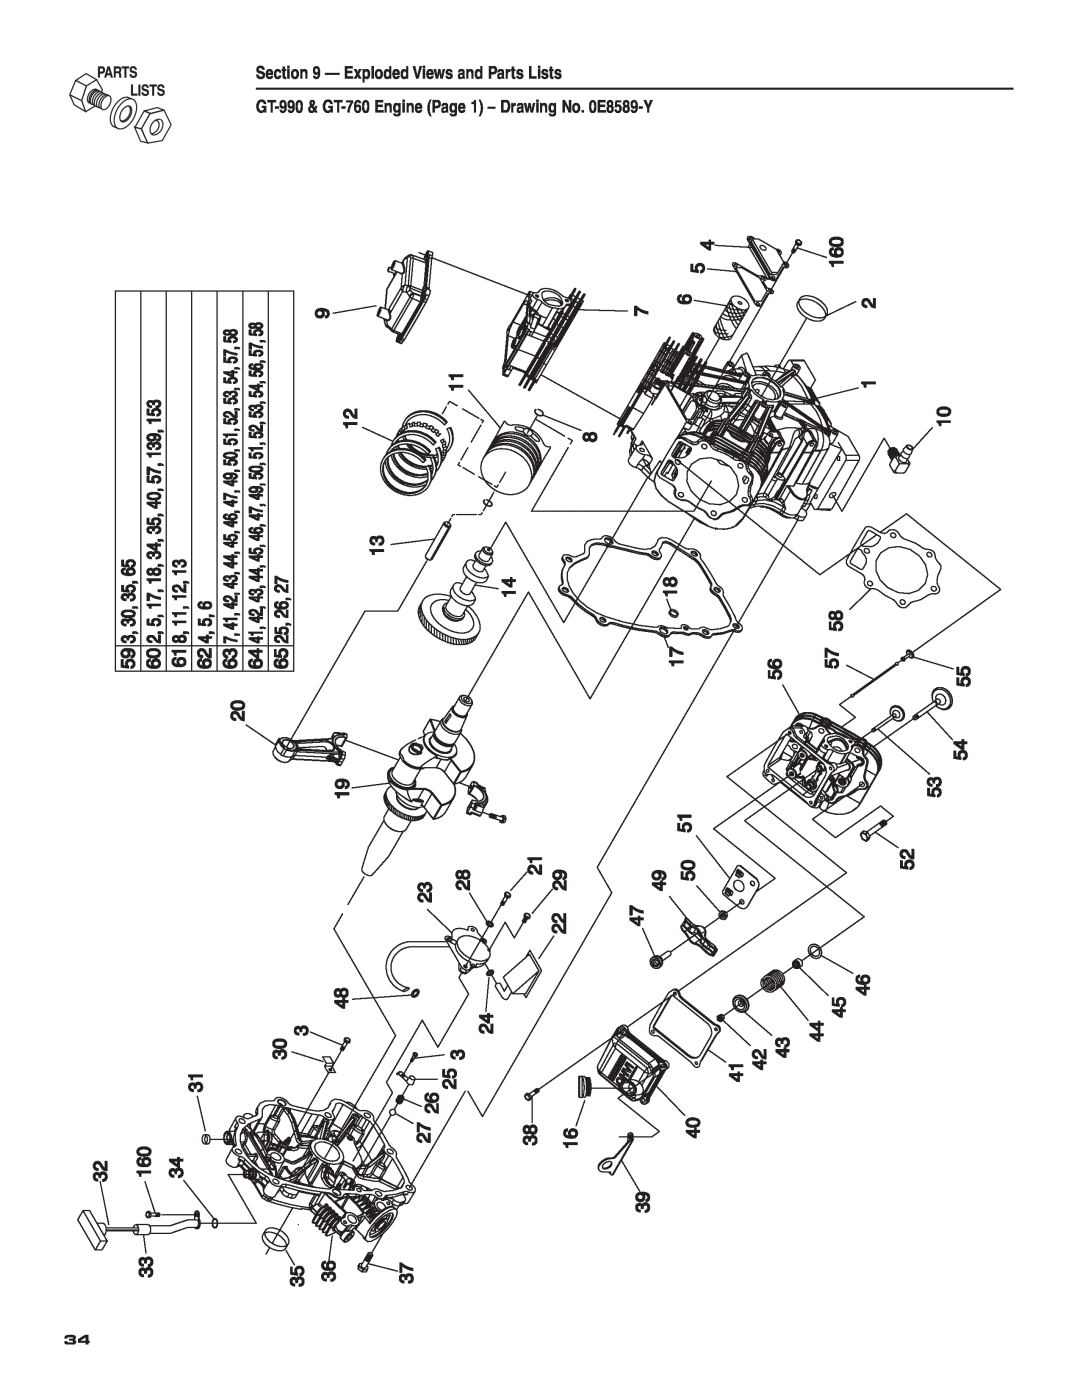 Guardian Technologies 004583-0 Exploded Views and Parts Lists, GT-990 & GT-760 Engine Page 1 - Drawing No. 0E8589-Y 